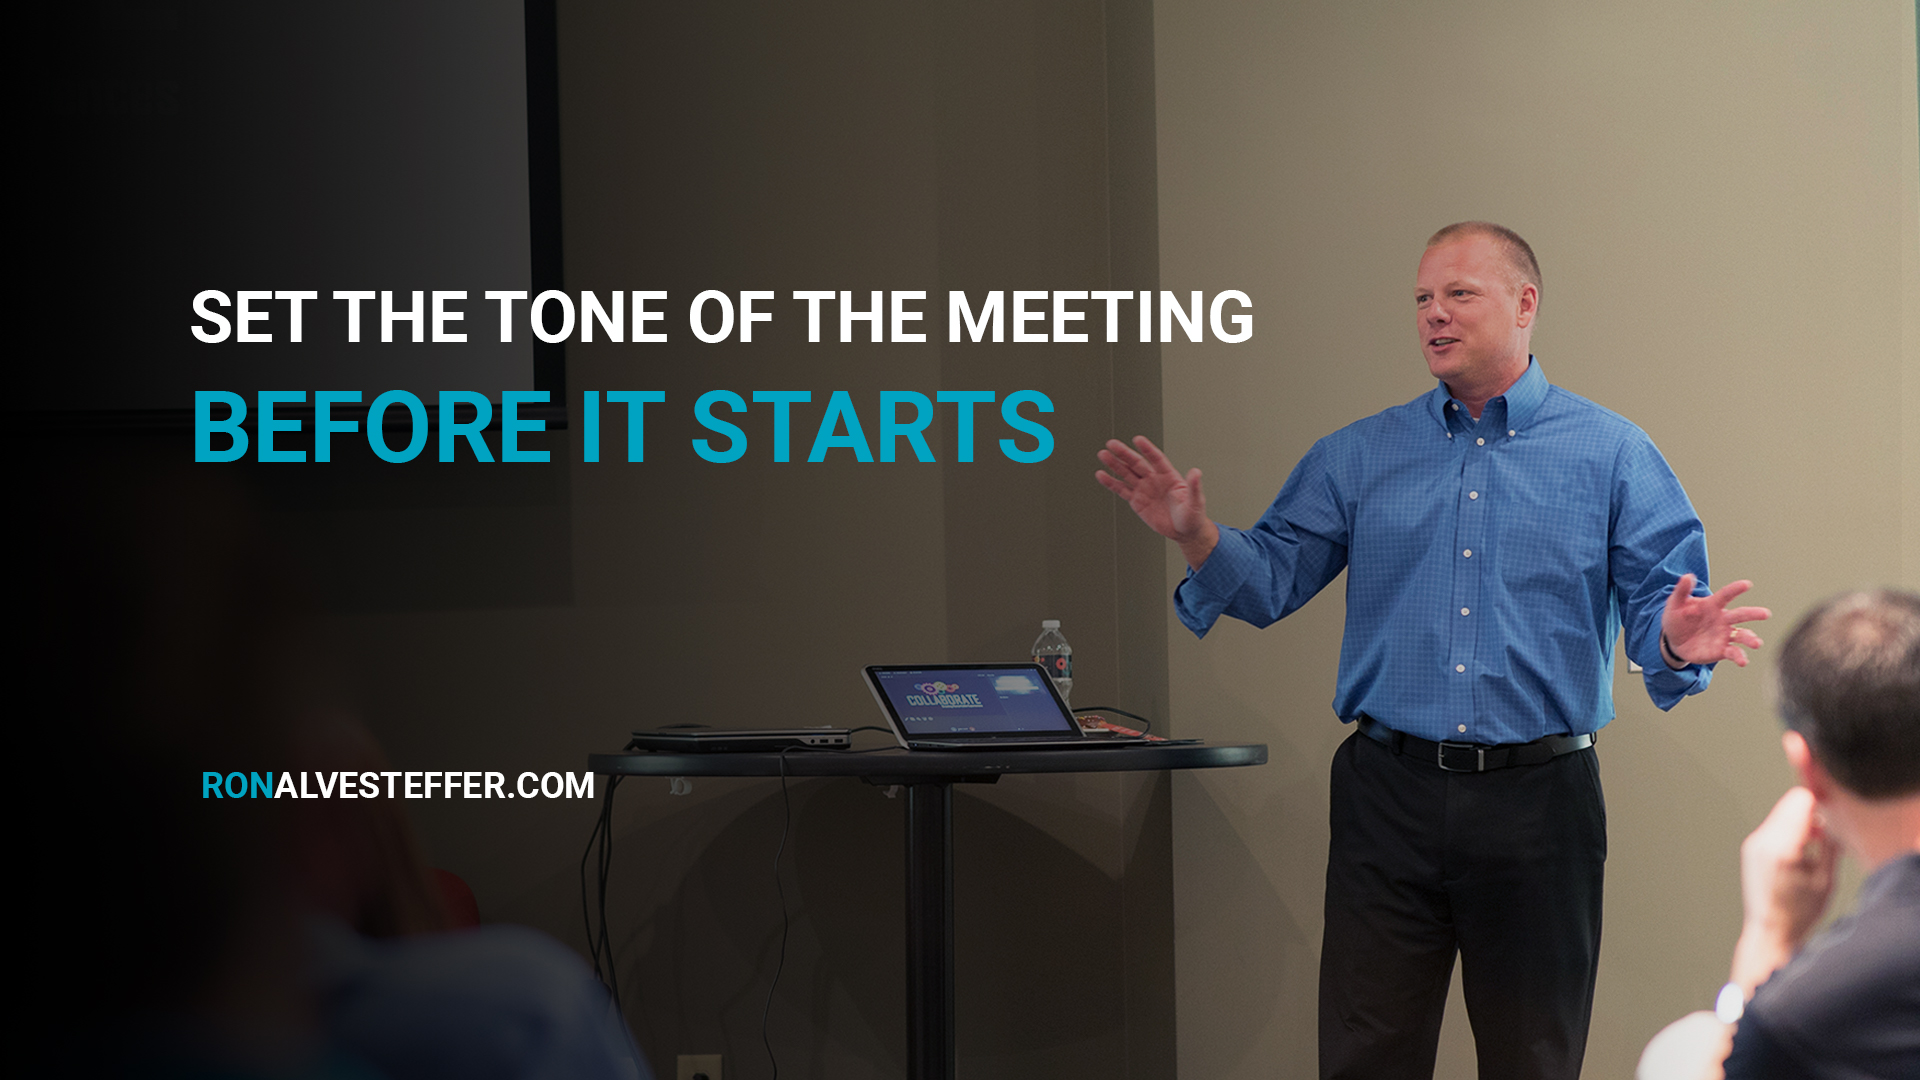 Set the Tone of the Meeting Before it Starts